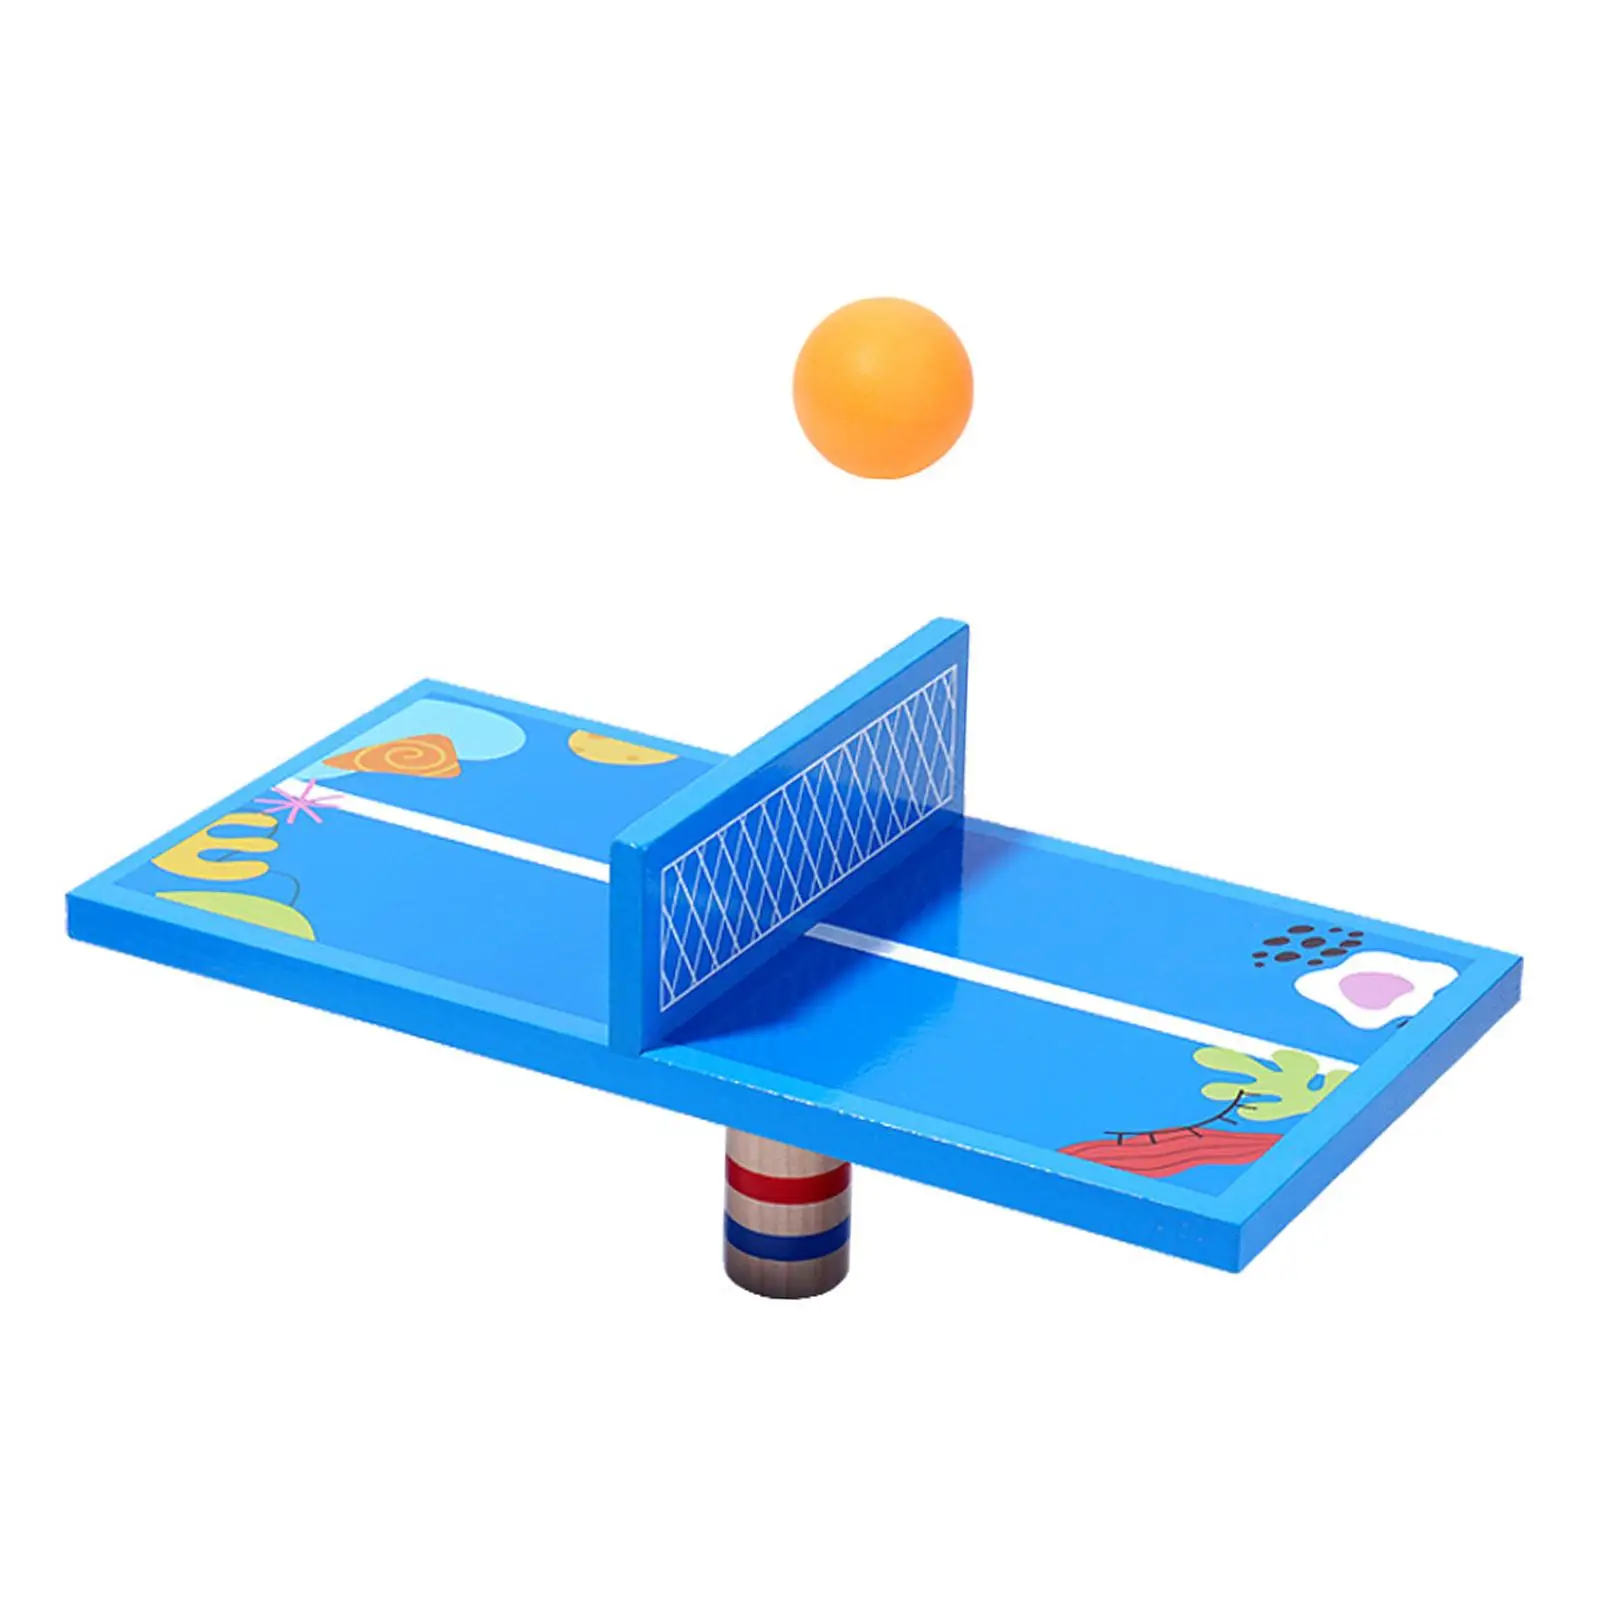 Mini Pingpong Table Game Intellectual Developmental for Birthday Gifts